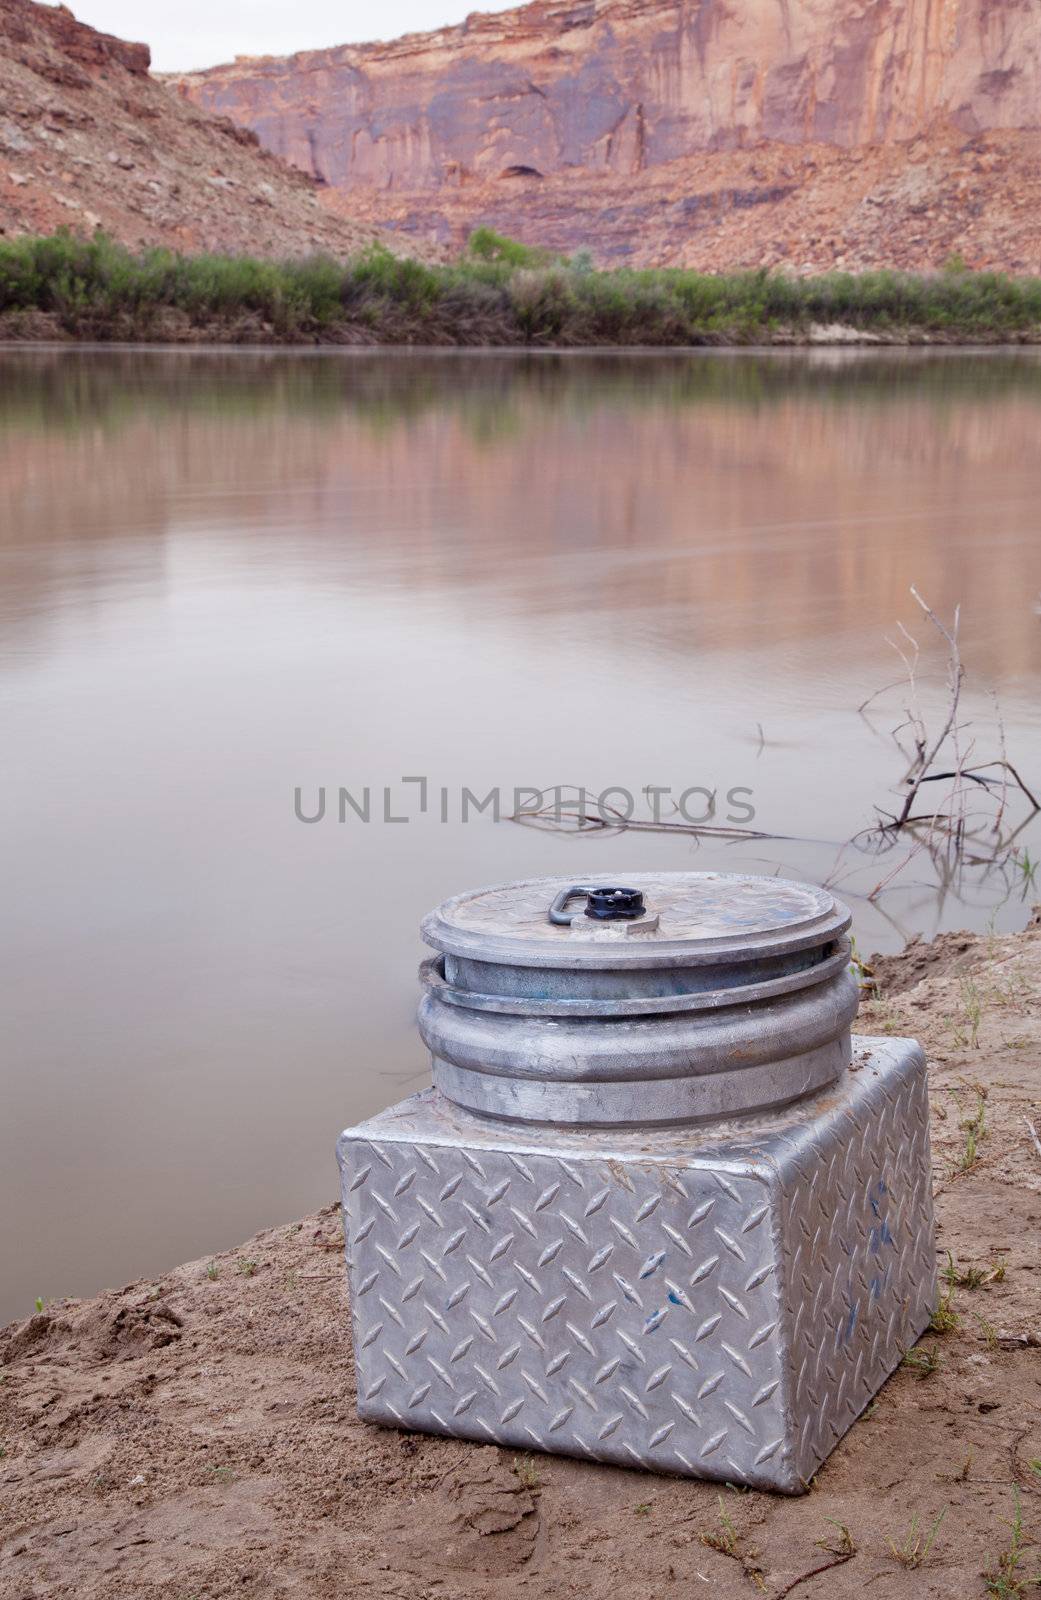 small metal portable toilet on a shore of Green River, equipment required on river trips in Canyonlands, Utah